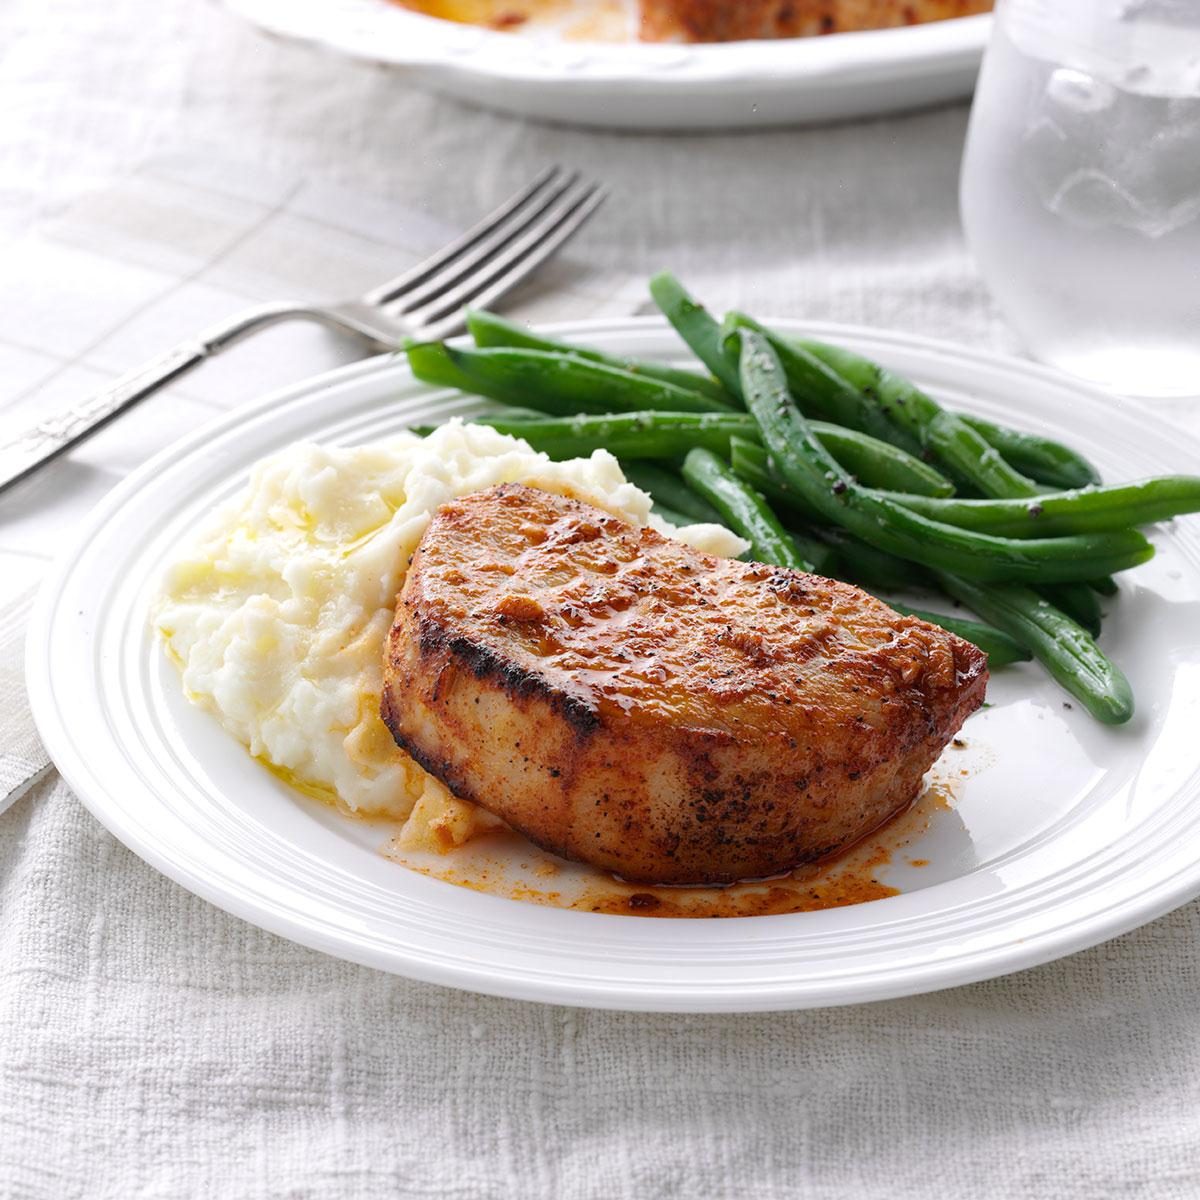 Broiled Pork Chops Recipe: How to Make It